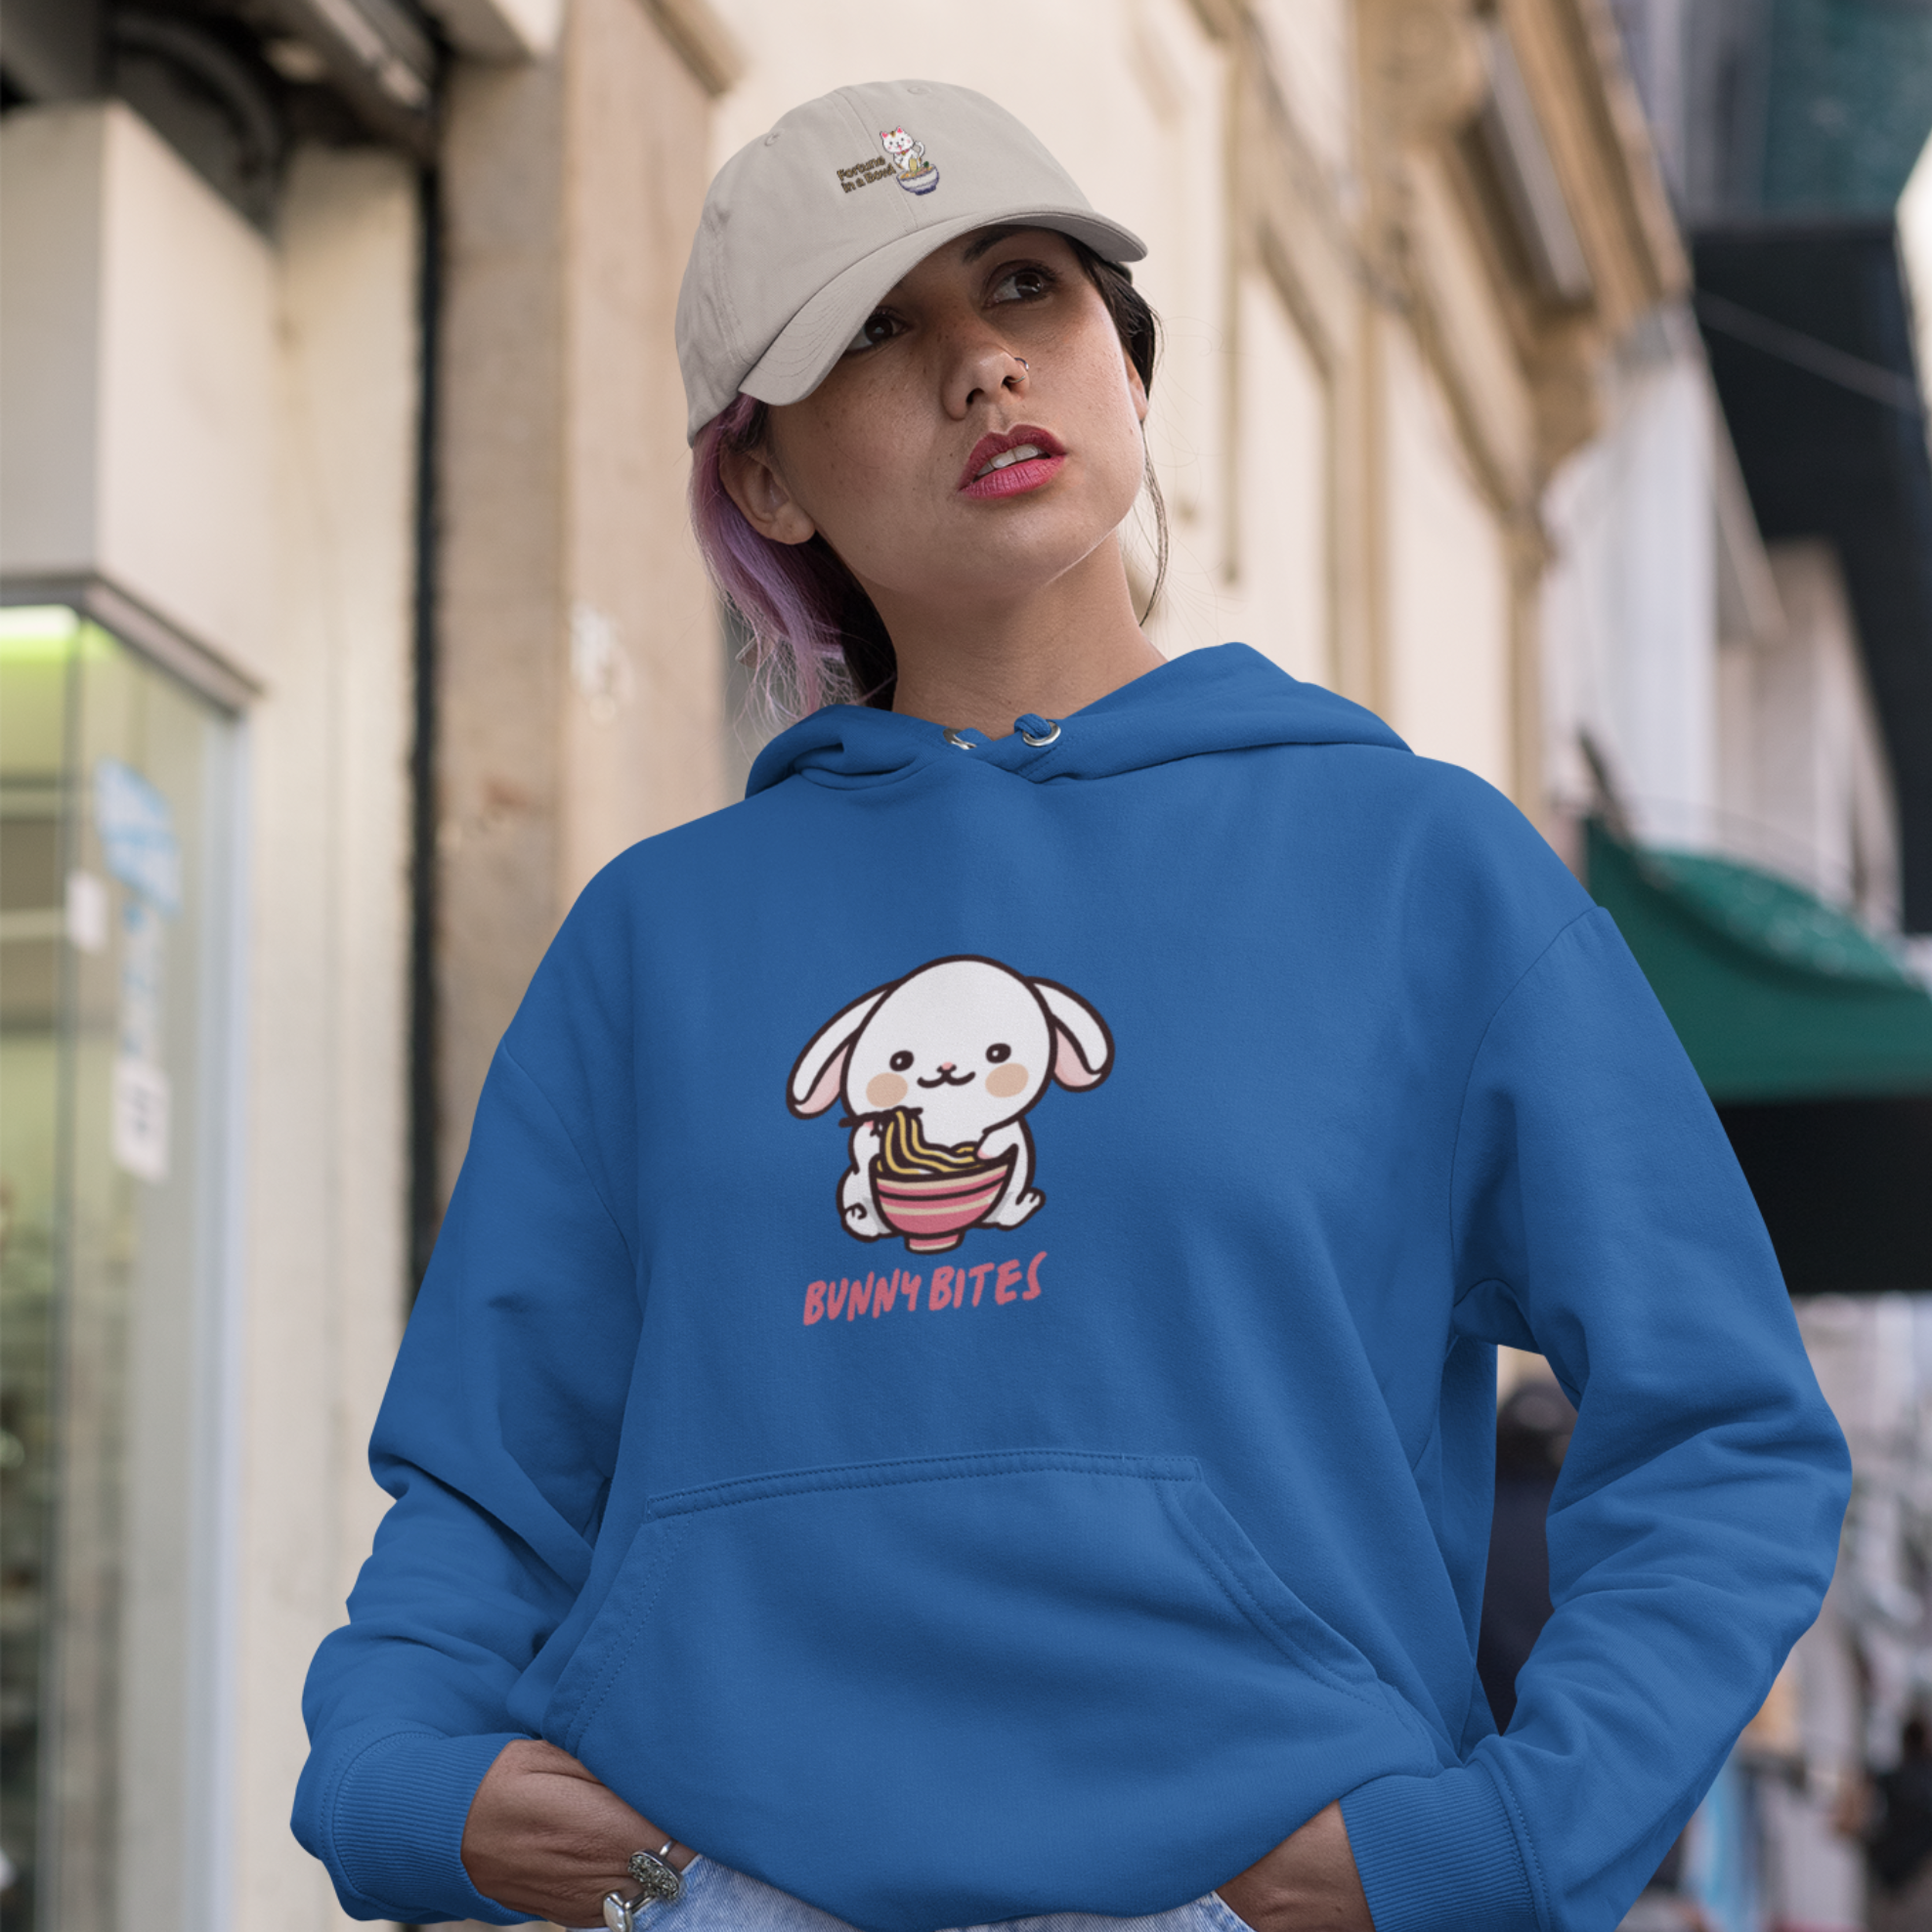 Ramen Hoodie: Bunny Bites - Deliciously Cute Ramen Art on Asian Foodie Hoodie with a Playful Pun Twist